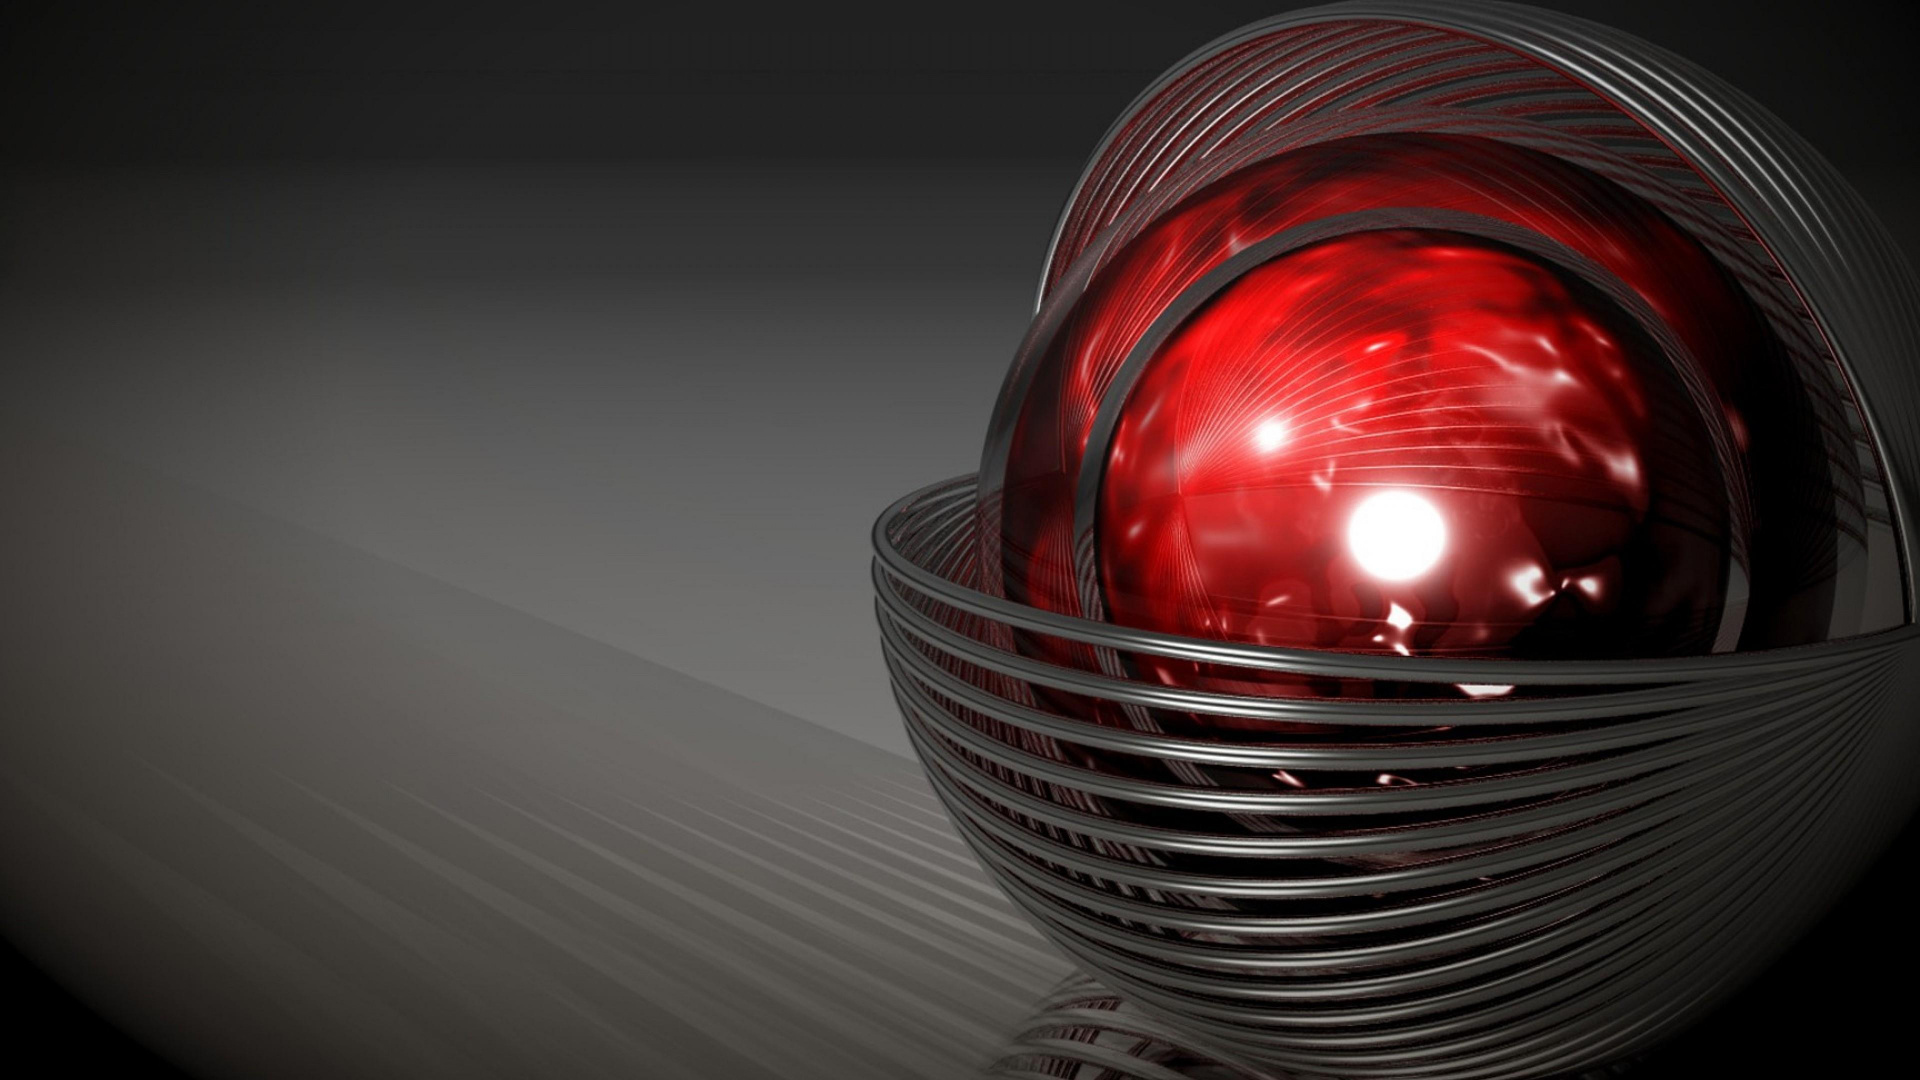 Red and Black Round Light. Wallpaper in 1920x1080 Resolution